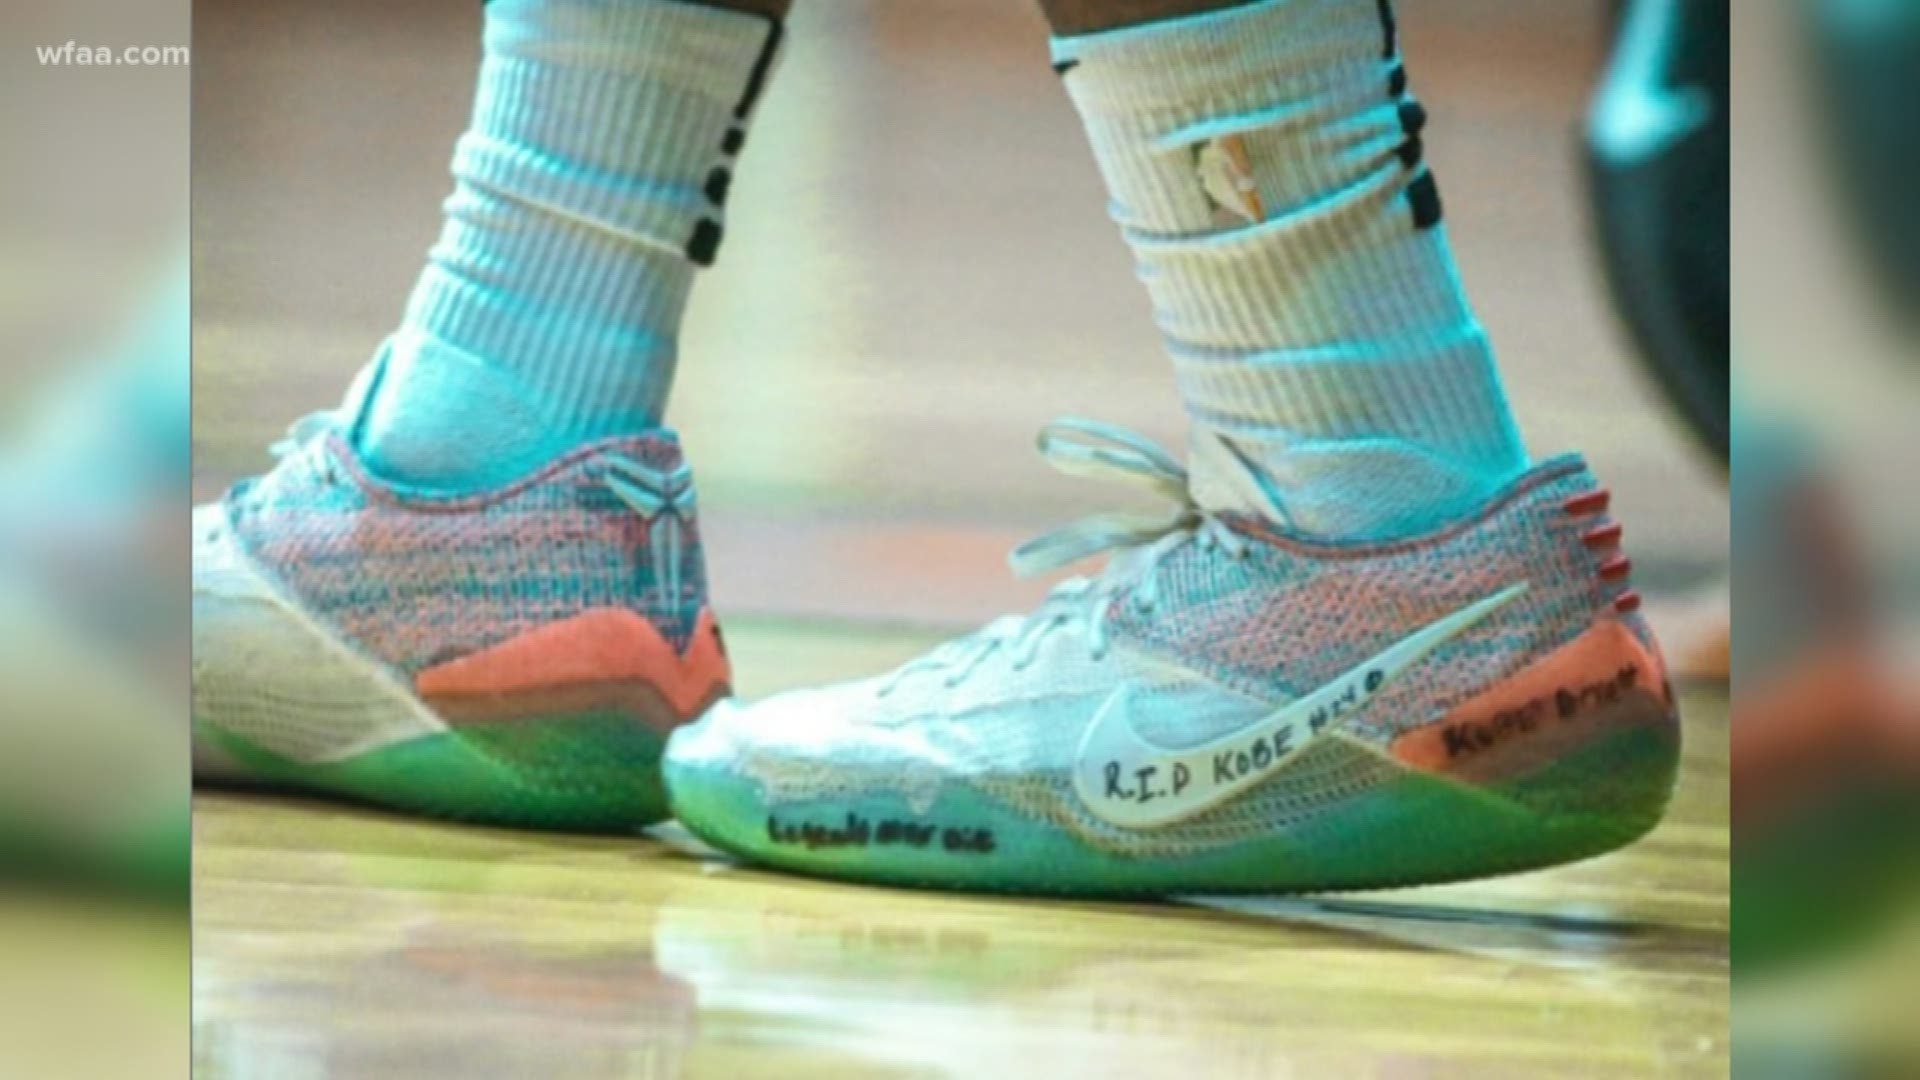 In tribute to Kobe Bryant, Lancaster star Mike Miles scored 24 points and then gave away his 'Kobe' sneakers.